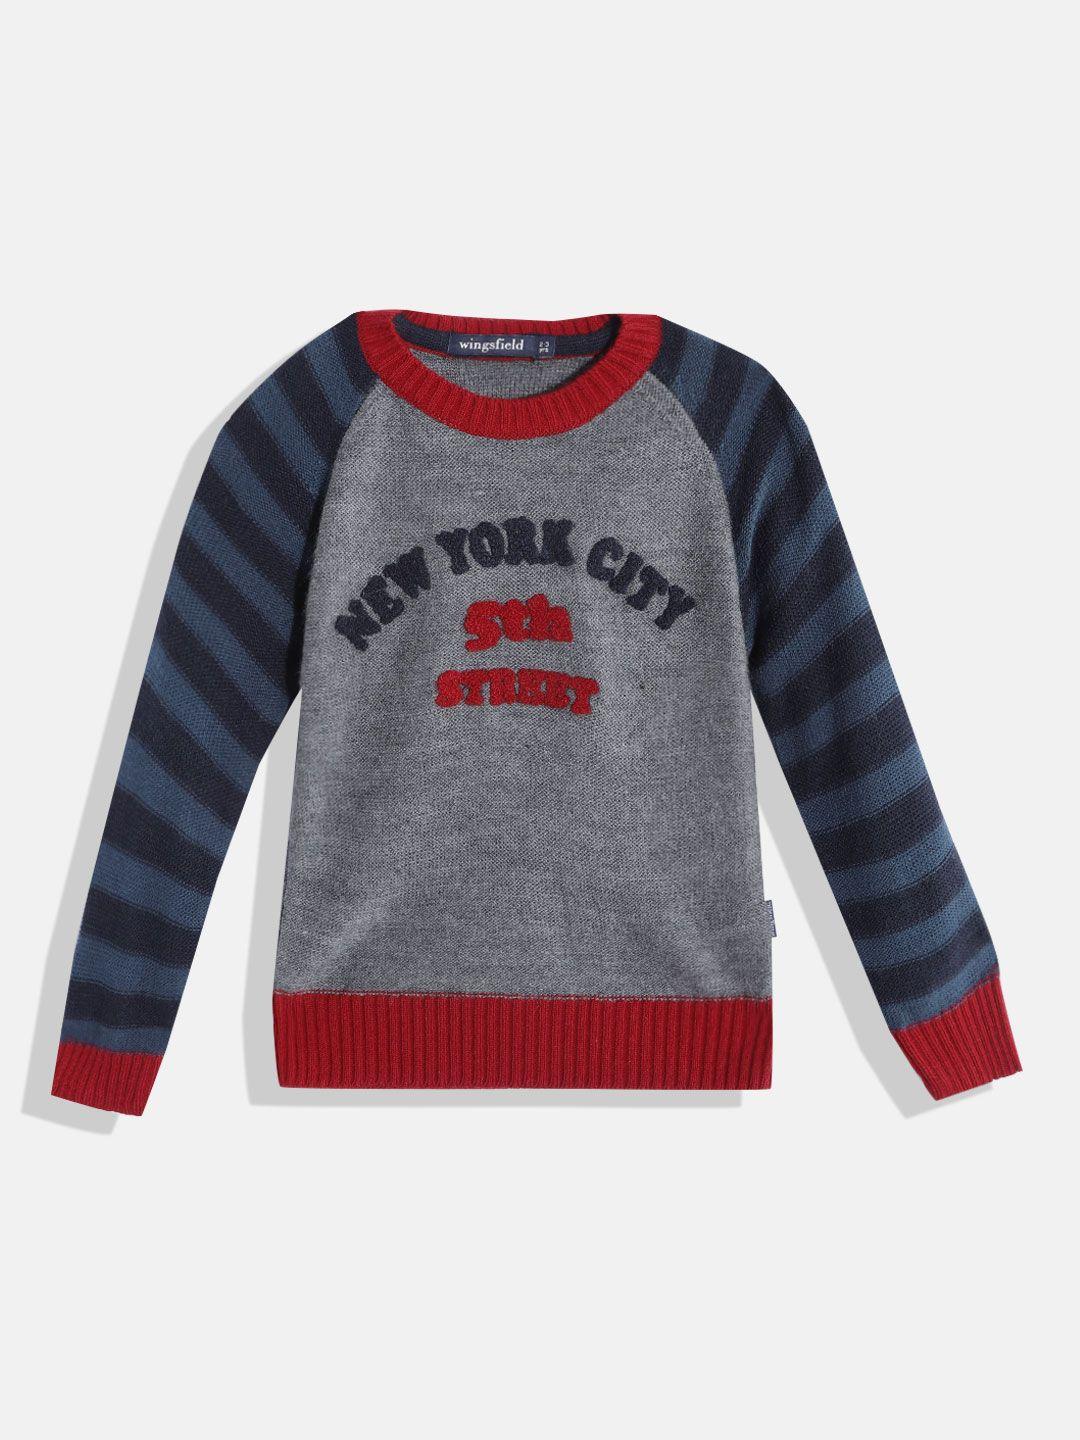 Wingsfield Boys Grey & Red Typography Printed Acrylic Pullover